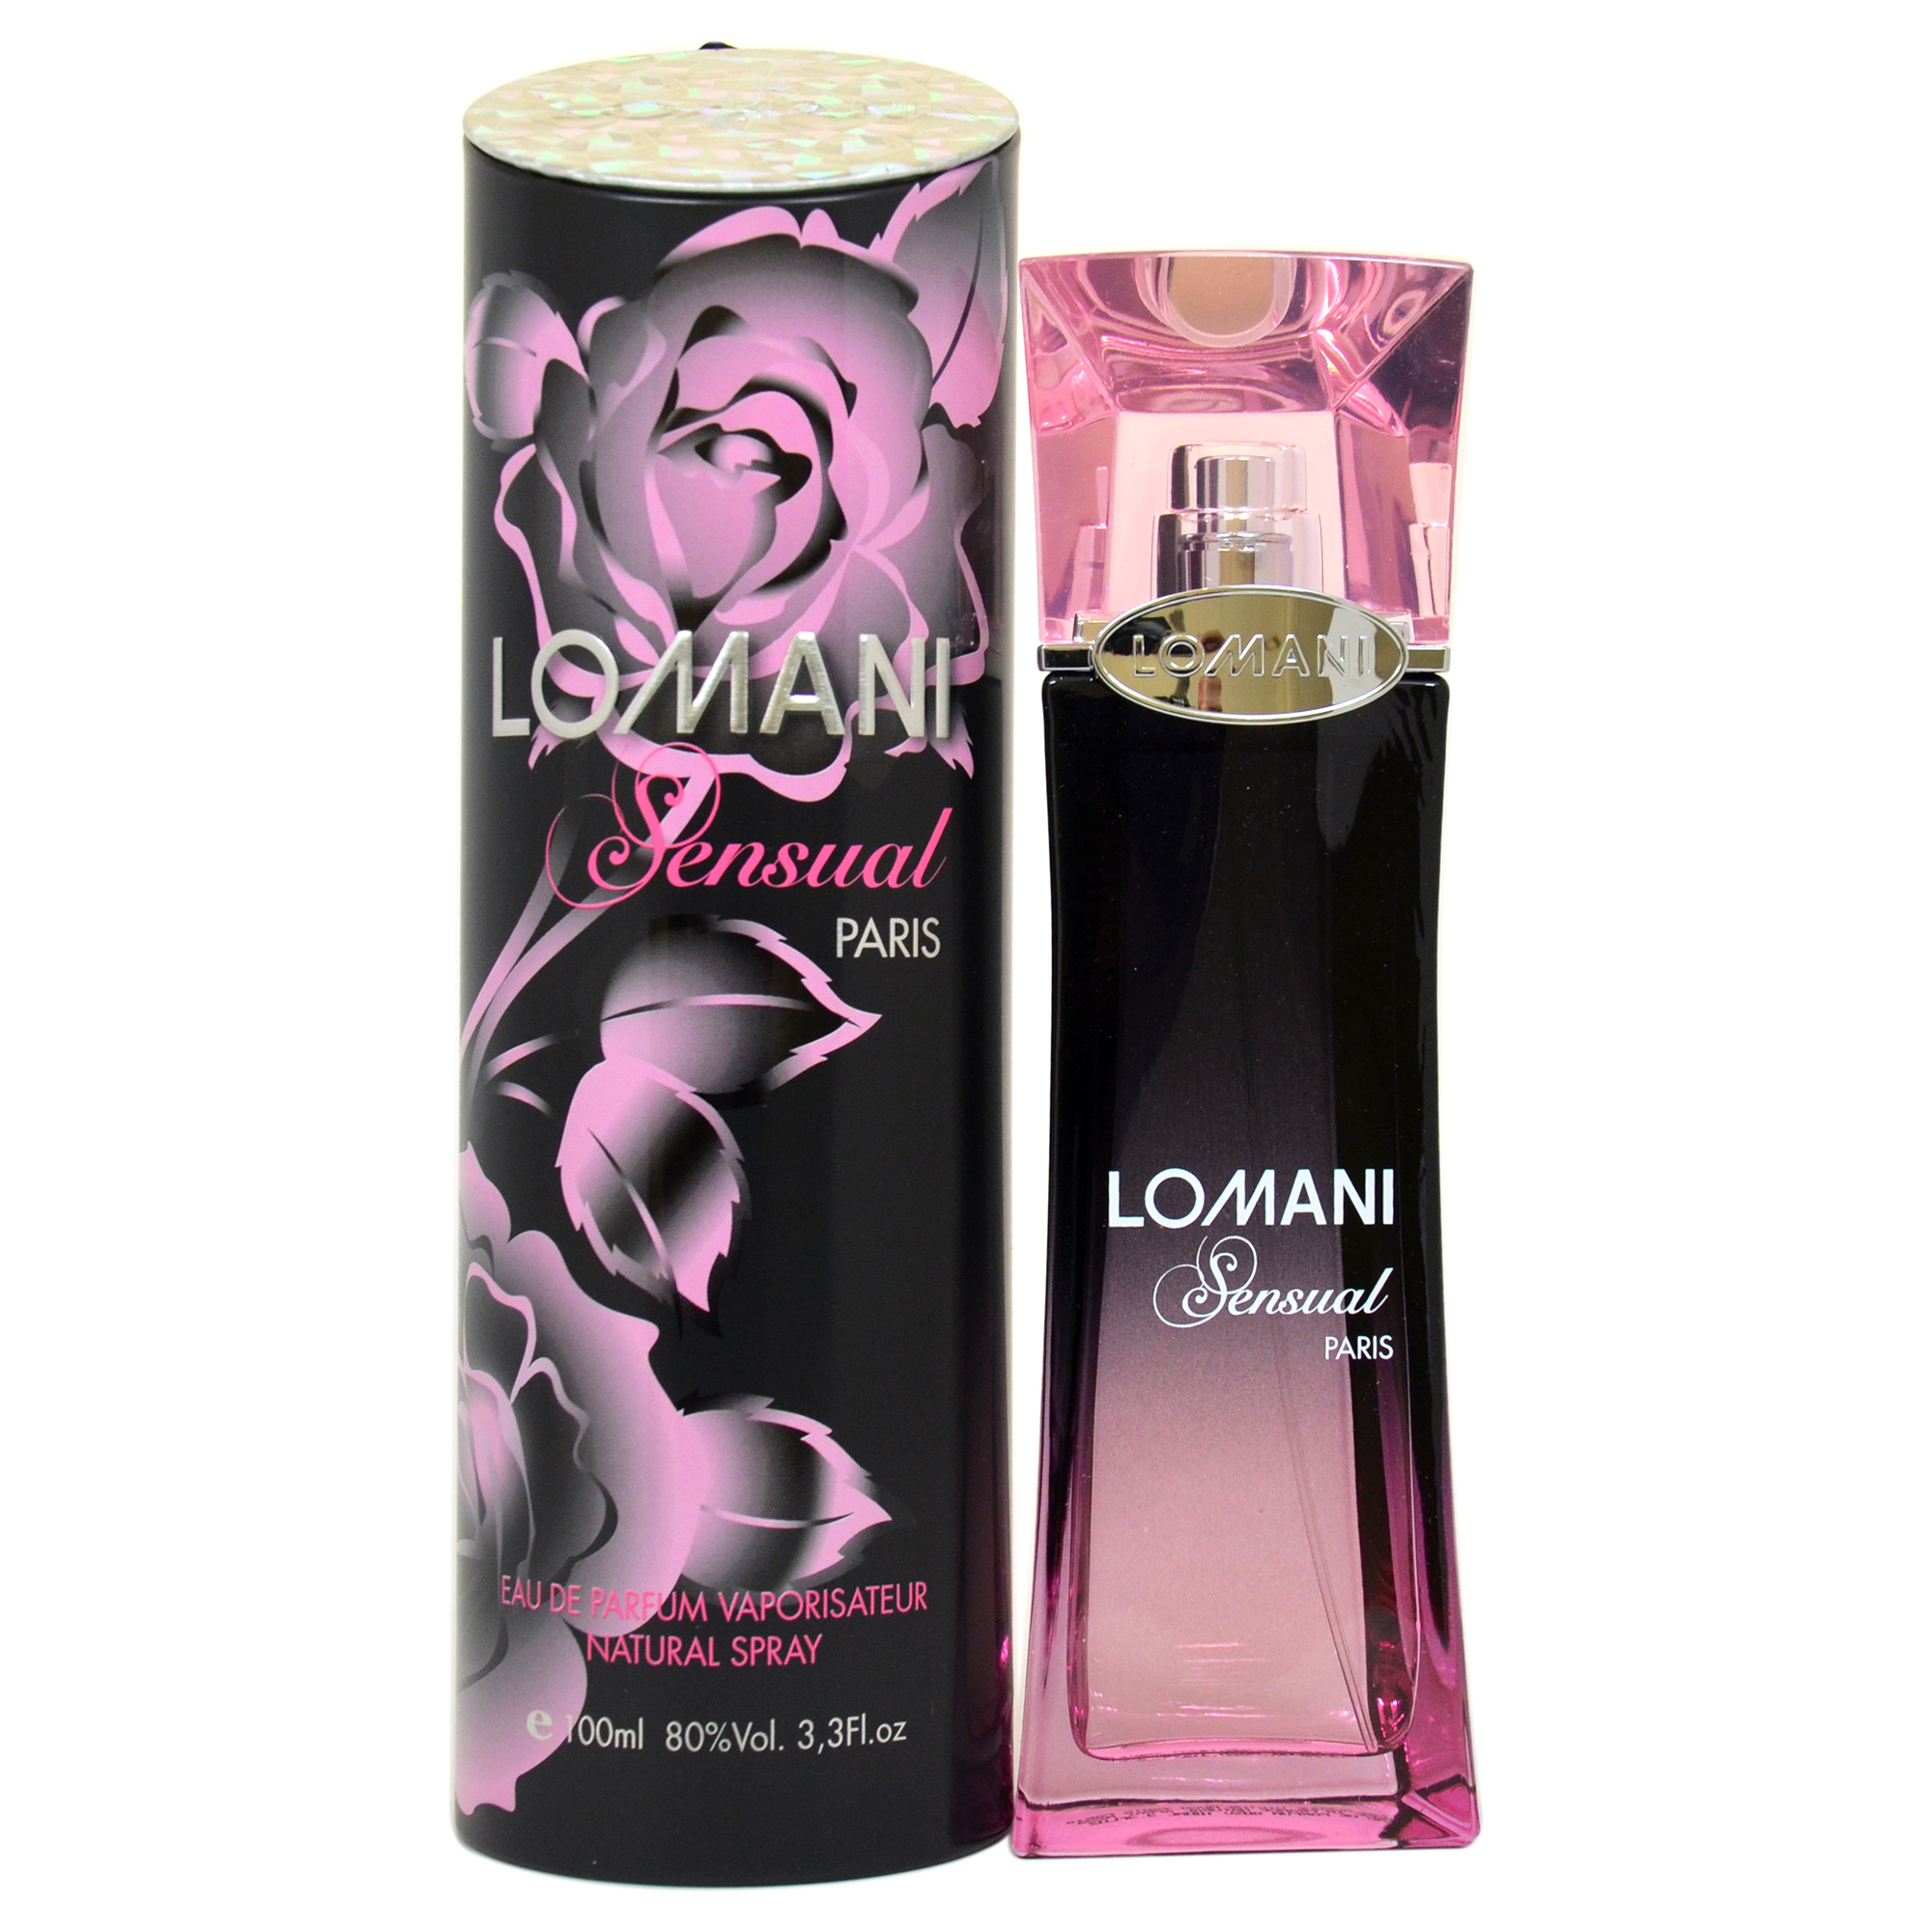 EAN 3610400000110 product image for Sensual by Lomani for Women - 3.3 oz EDP Spray | upcitemdb.com